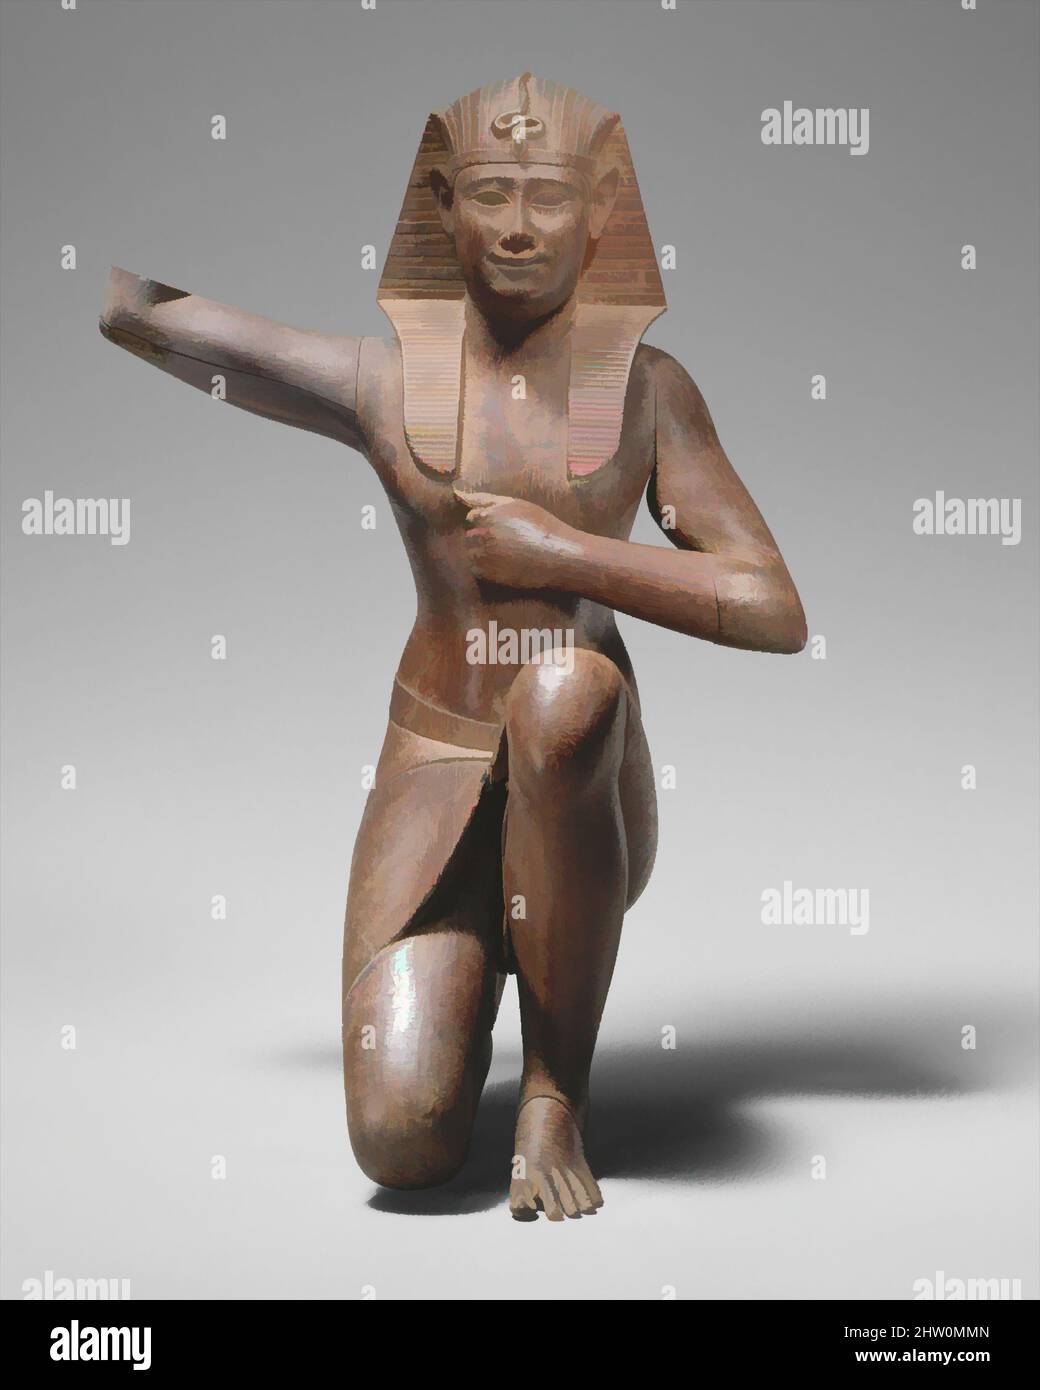 Art inspired by Ritual Figure, Late Period or Early Ptolemaic Period, Dynasty 30 or later, 380–246 B.C., From Egypt, Wood, formerly clad with lead sheet, H. 21 cm (8 1/4 in.); W. 14.3 cm (5 5/8 in.); D. 11 cm (4 5/16 in.), The fluid pose and chest-beating gesture of this extraordinary, Classic works modernized by Artotop with a splash of modernity. Shapes, color and value, eye-catching visual impact on art. Emotions through freedom of artworks in a contemporary way. A timeless message pursuing a wildly creative new direction. Artists turning to the digital medium and creating the Artotop NFT Stock Photo